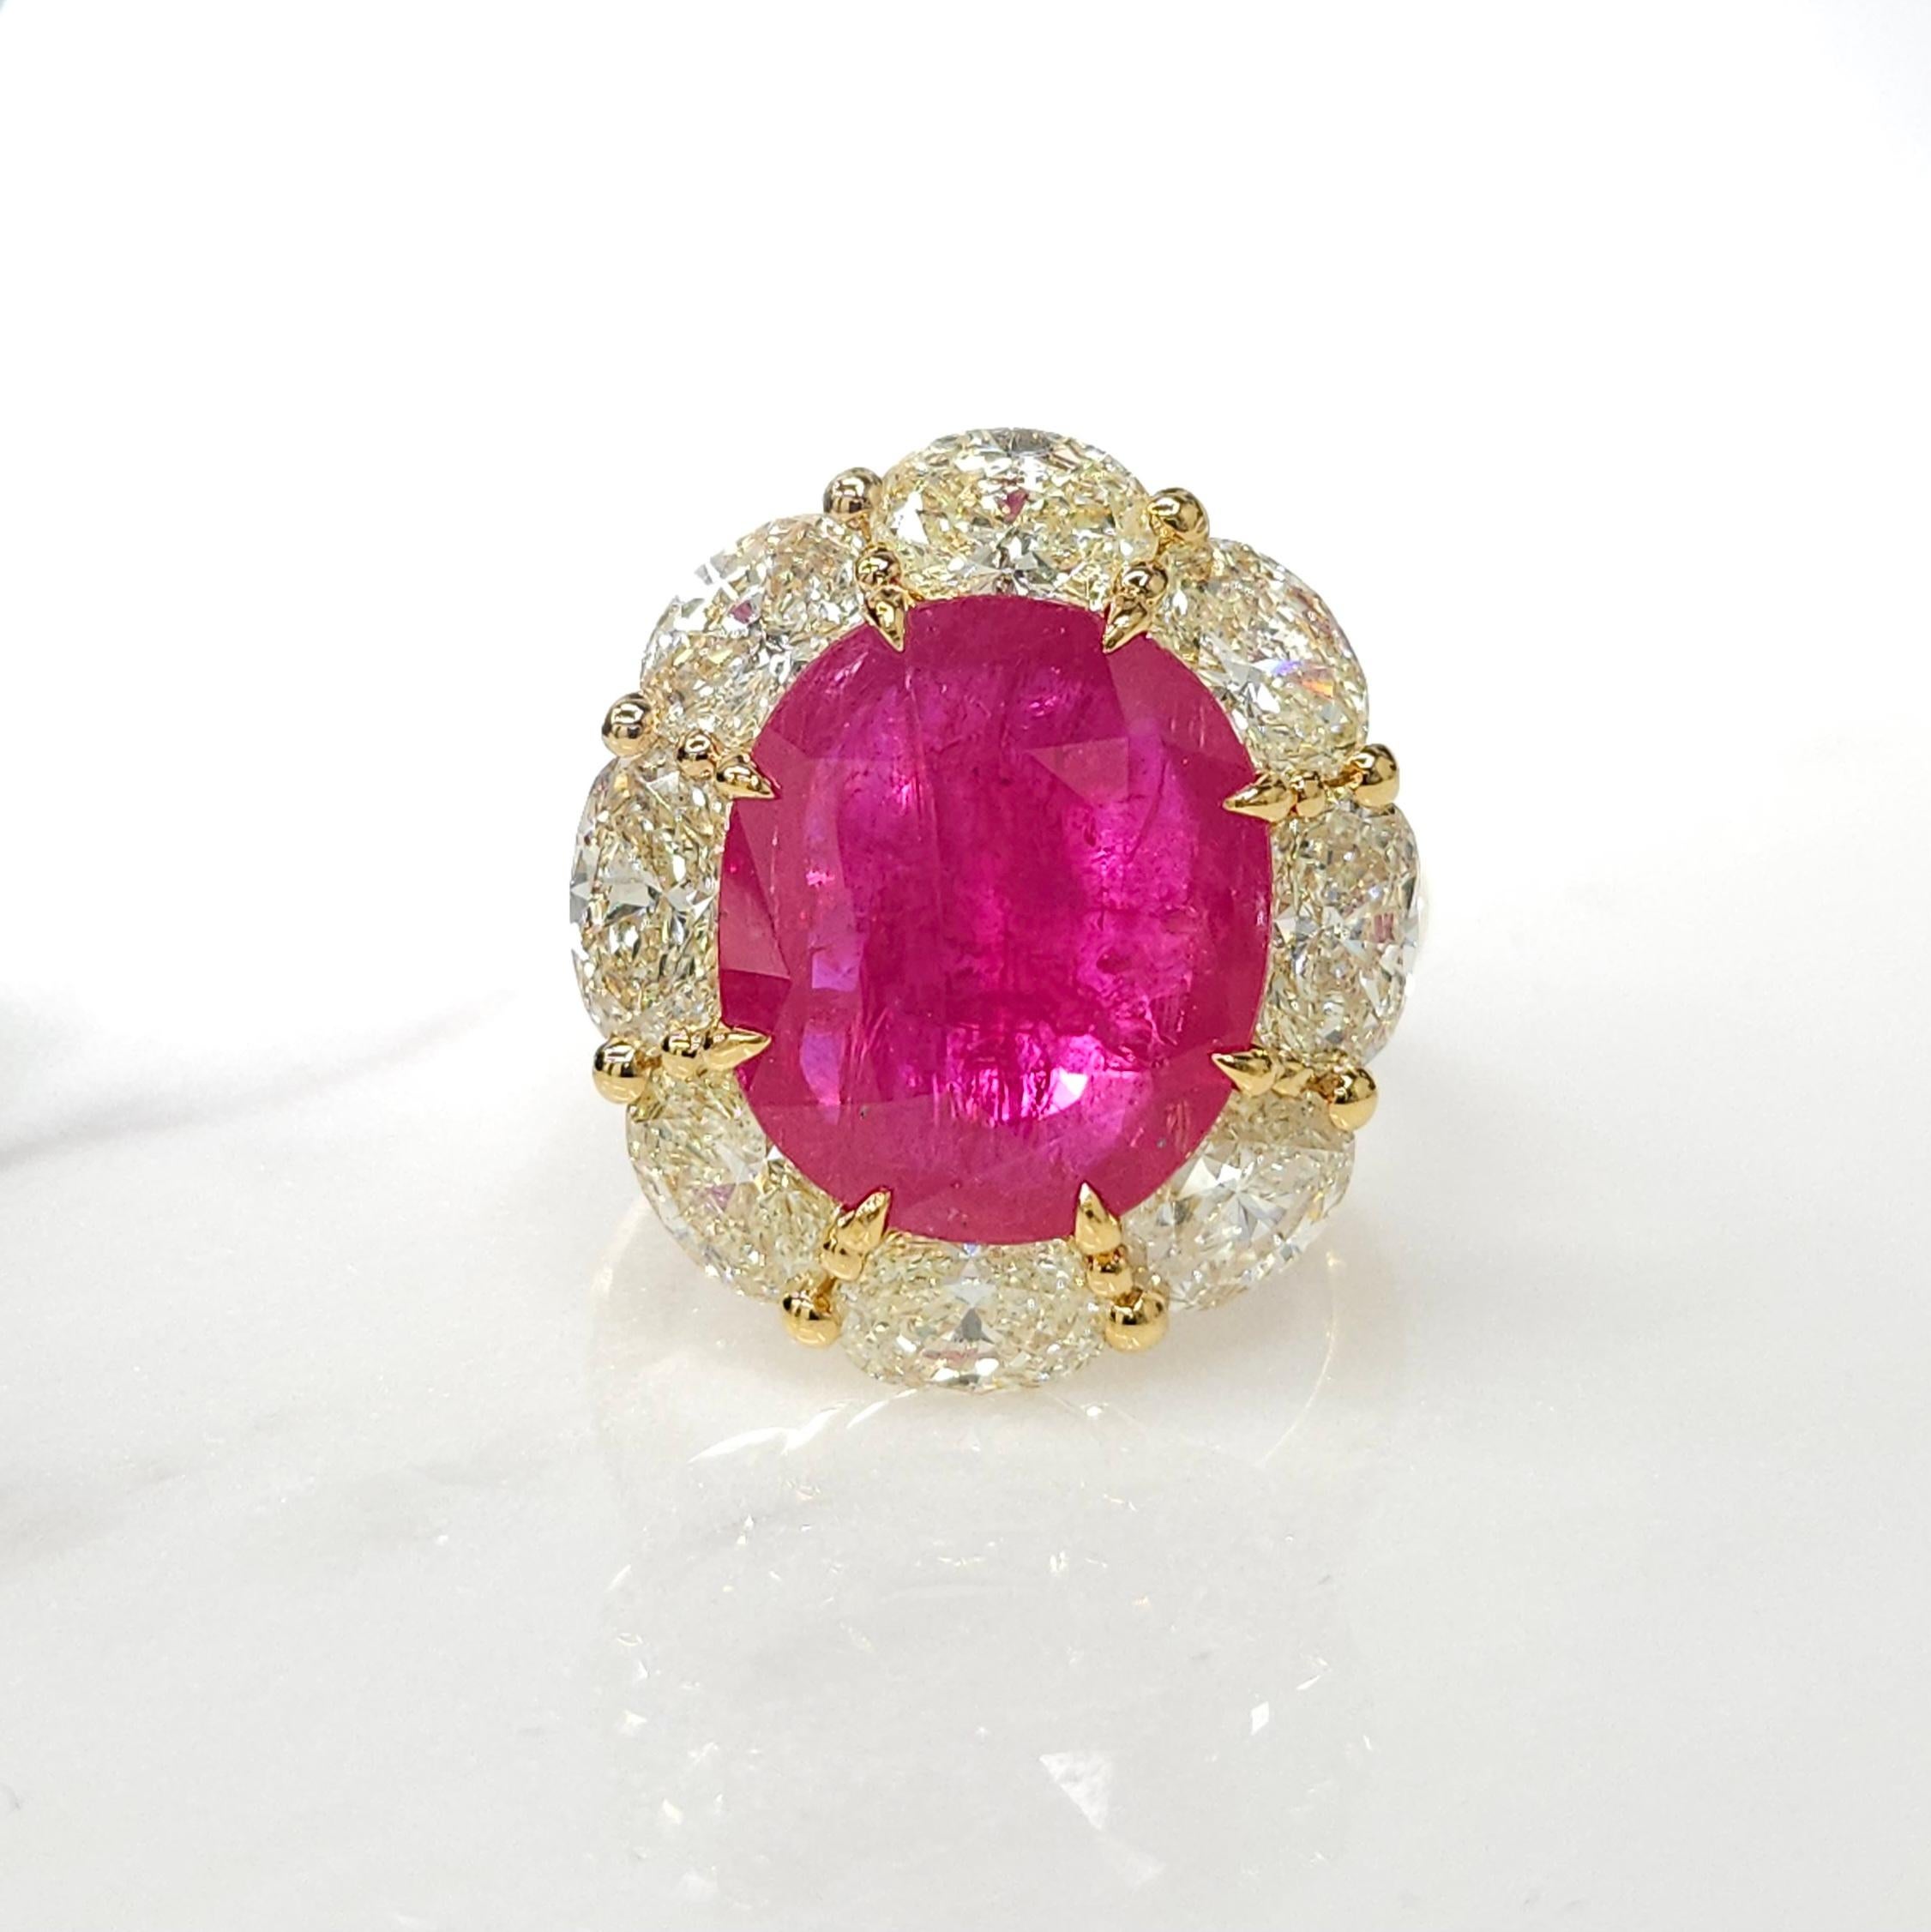 Oval Cut IGI Certified 6.53 Carat Ruby & 3.71 Carat Oval Diamond Ring in 18K Yellow Gold For Sale